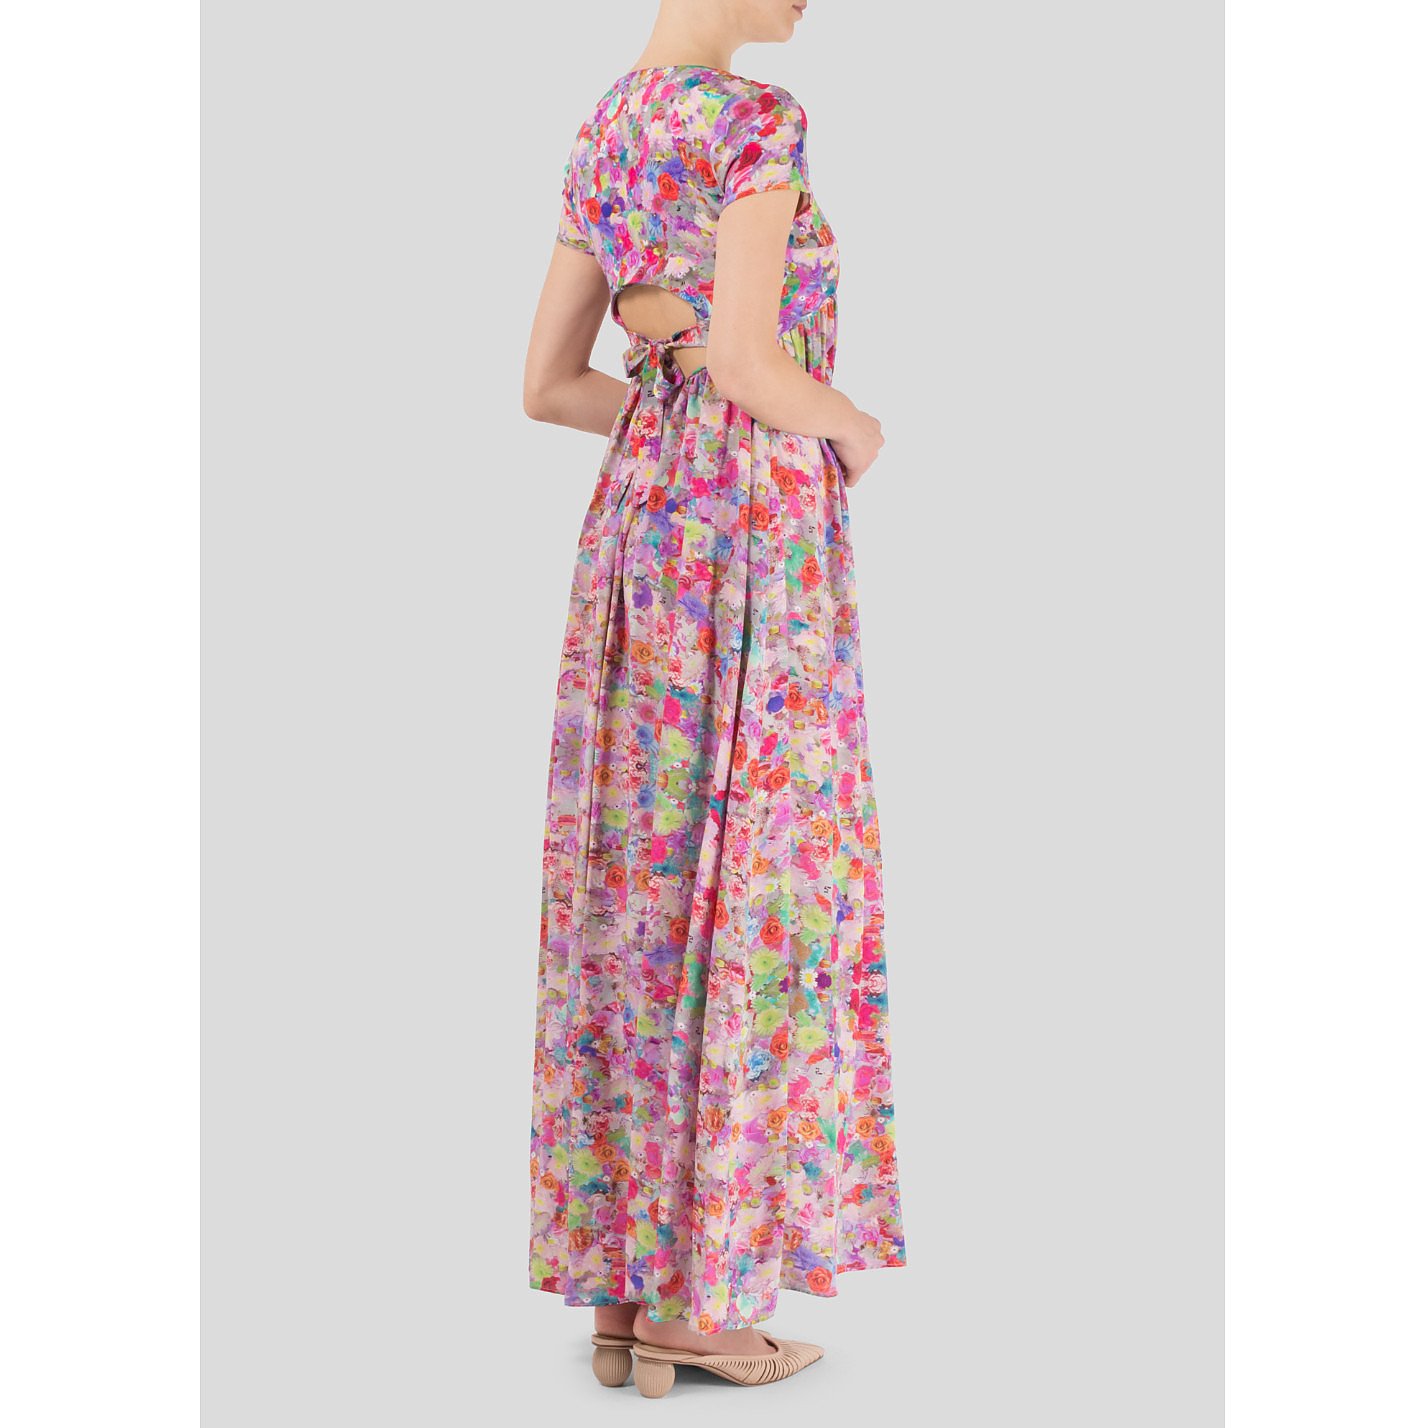 Tramp In Disguise Floral Maxi Dress